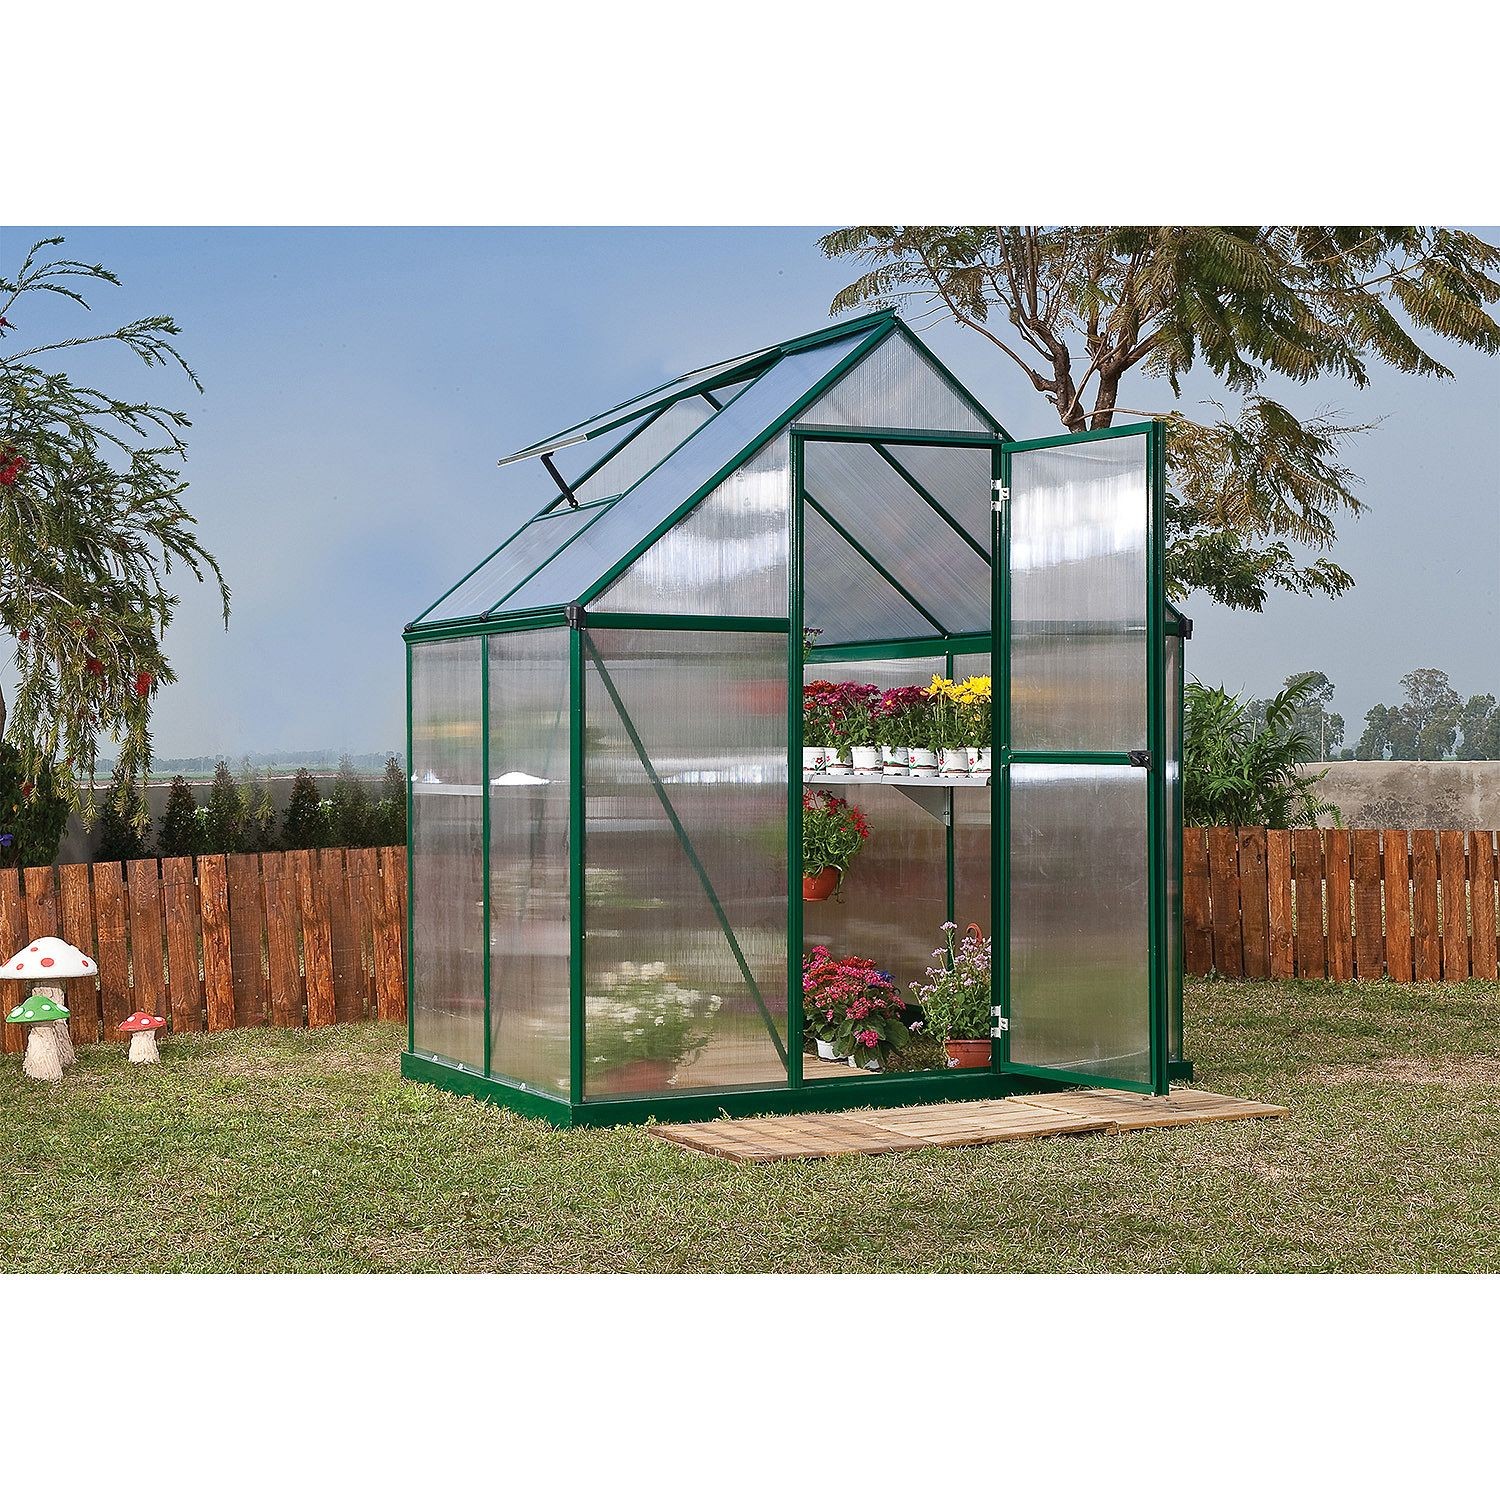 The Mythos 6 x 4 Greenhouse Green gives you extra room for all of your growing needs. 